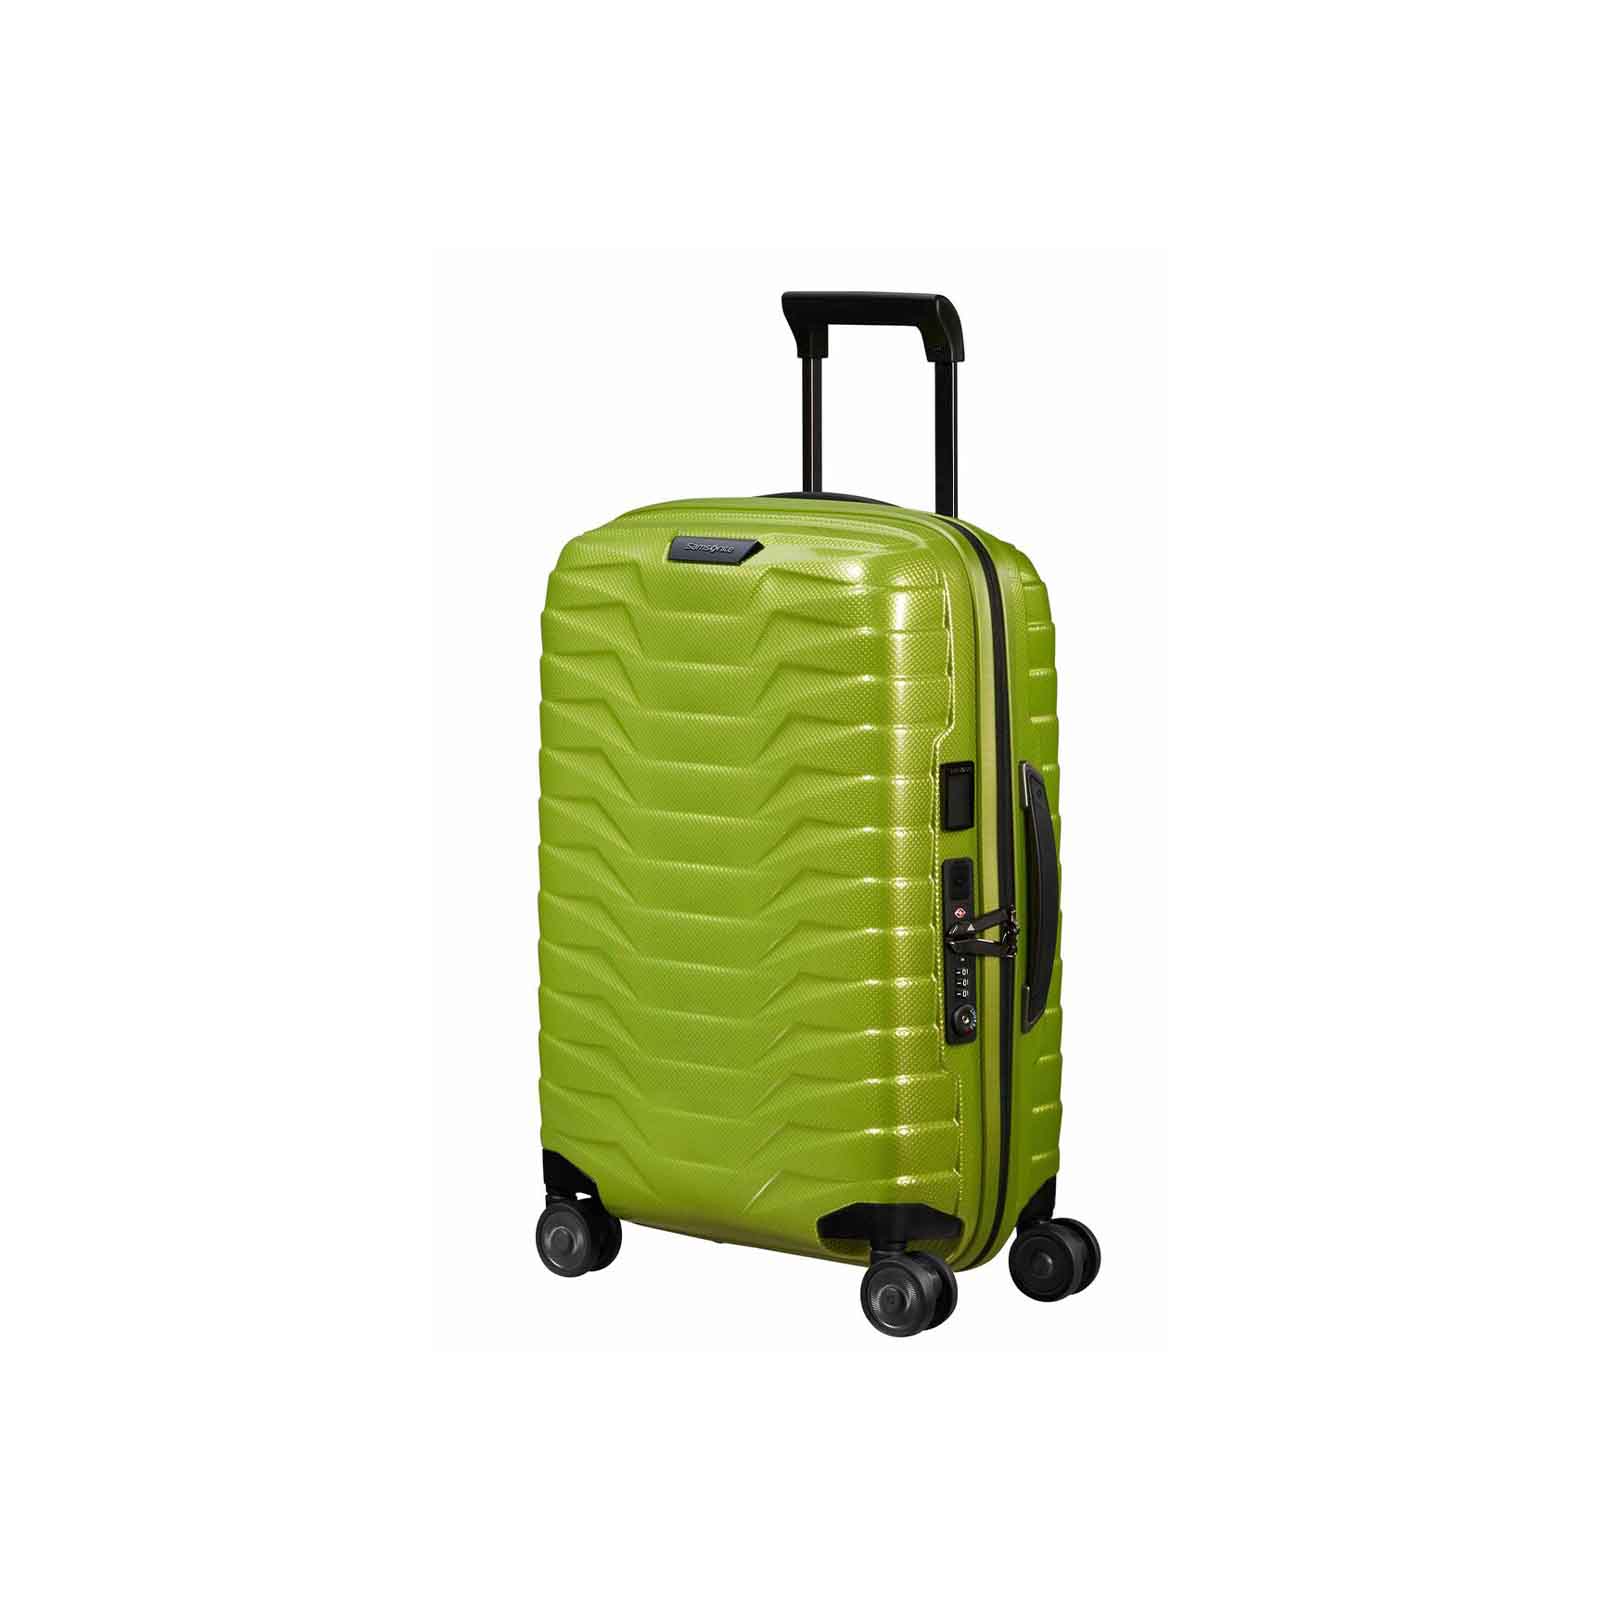 Samsonite-Proxis-55cm-Suitcase-Lime-Front-Angle